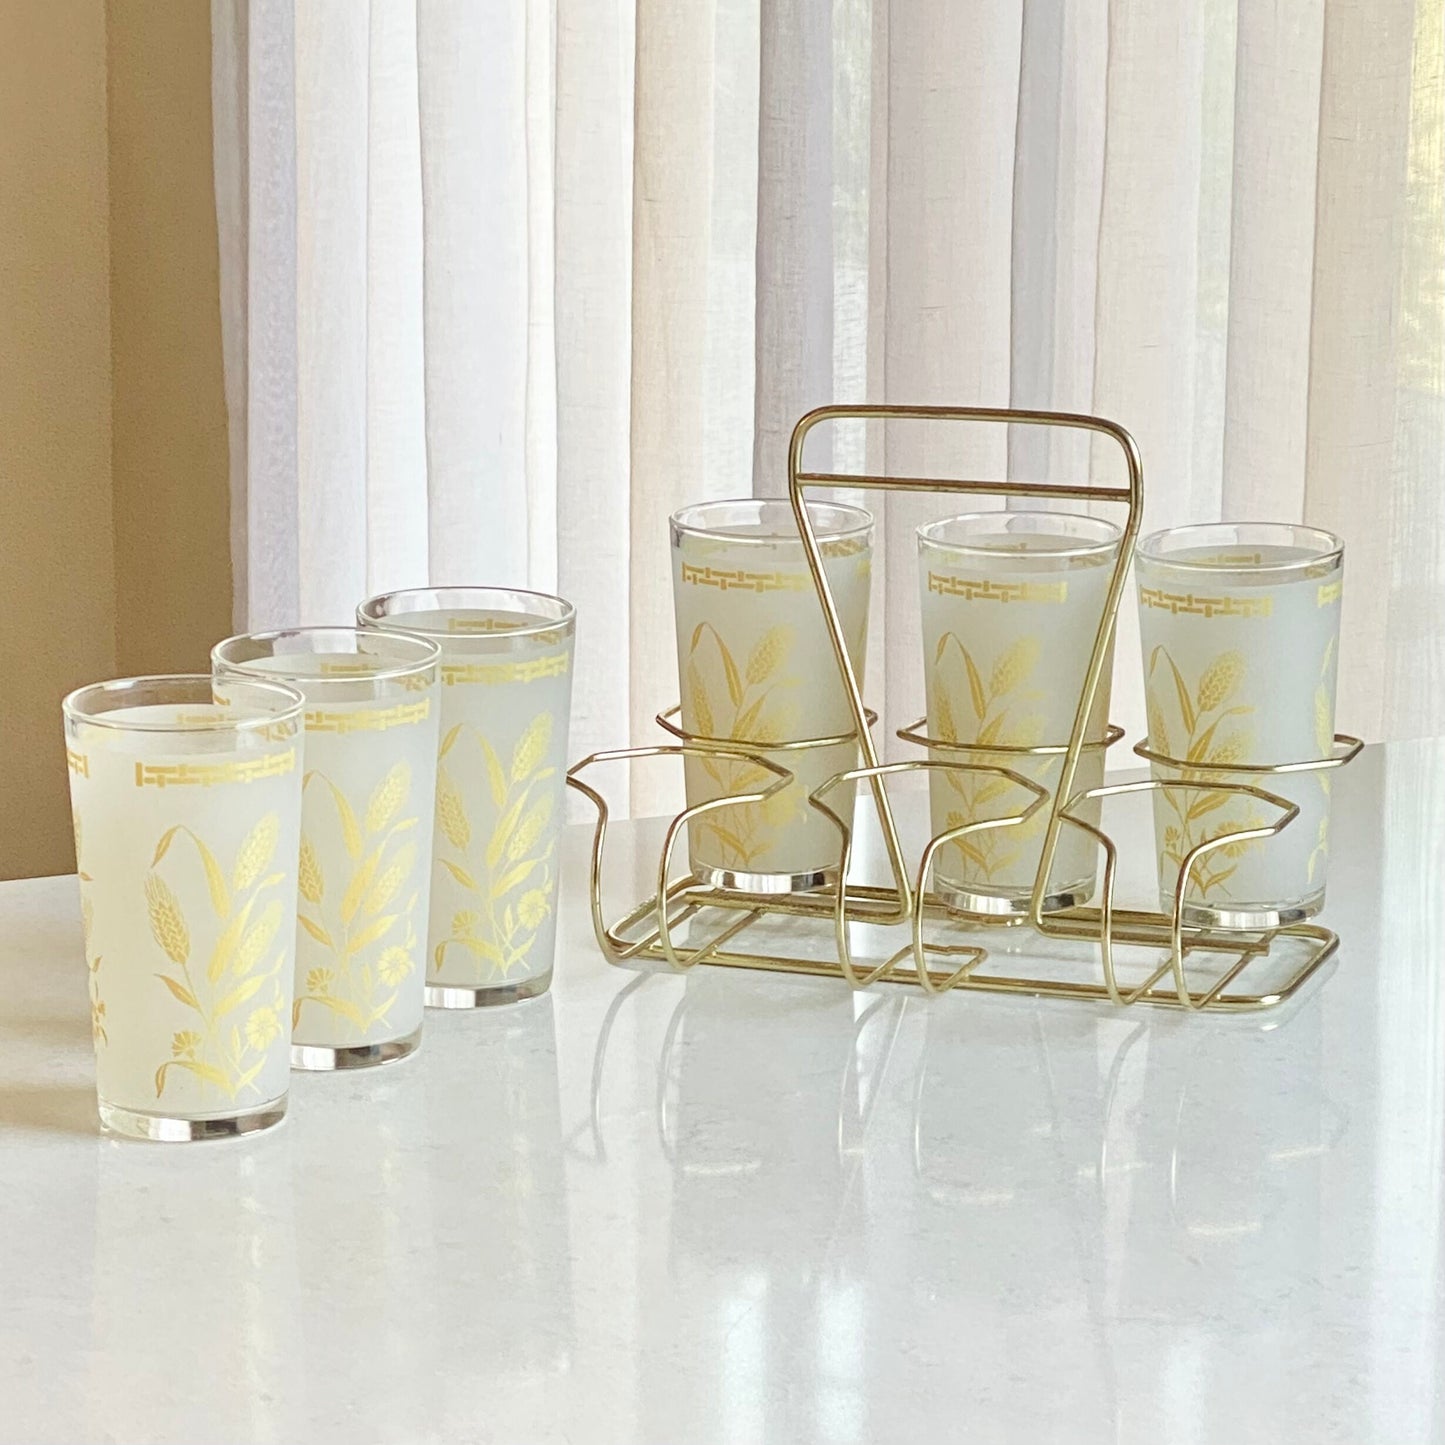 Vintage Golden Wheat Set of 6 Frosted Glasses with Carrier Caddy